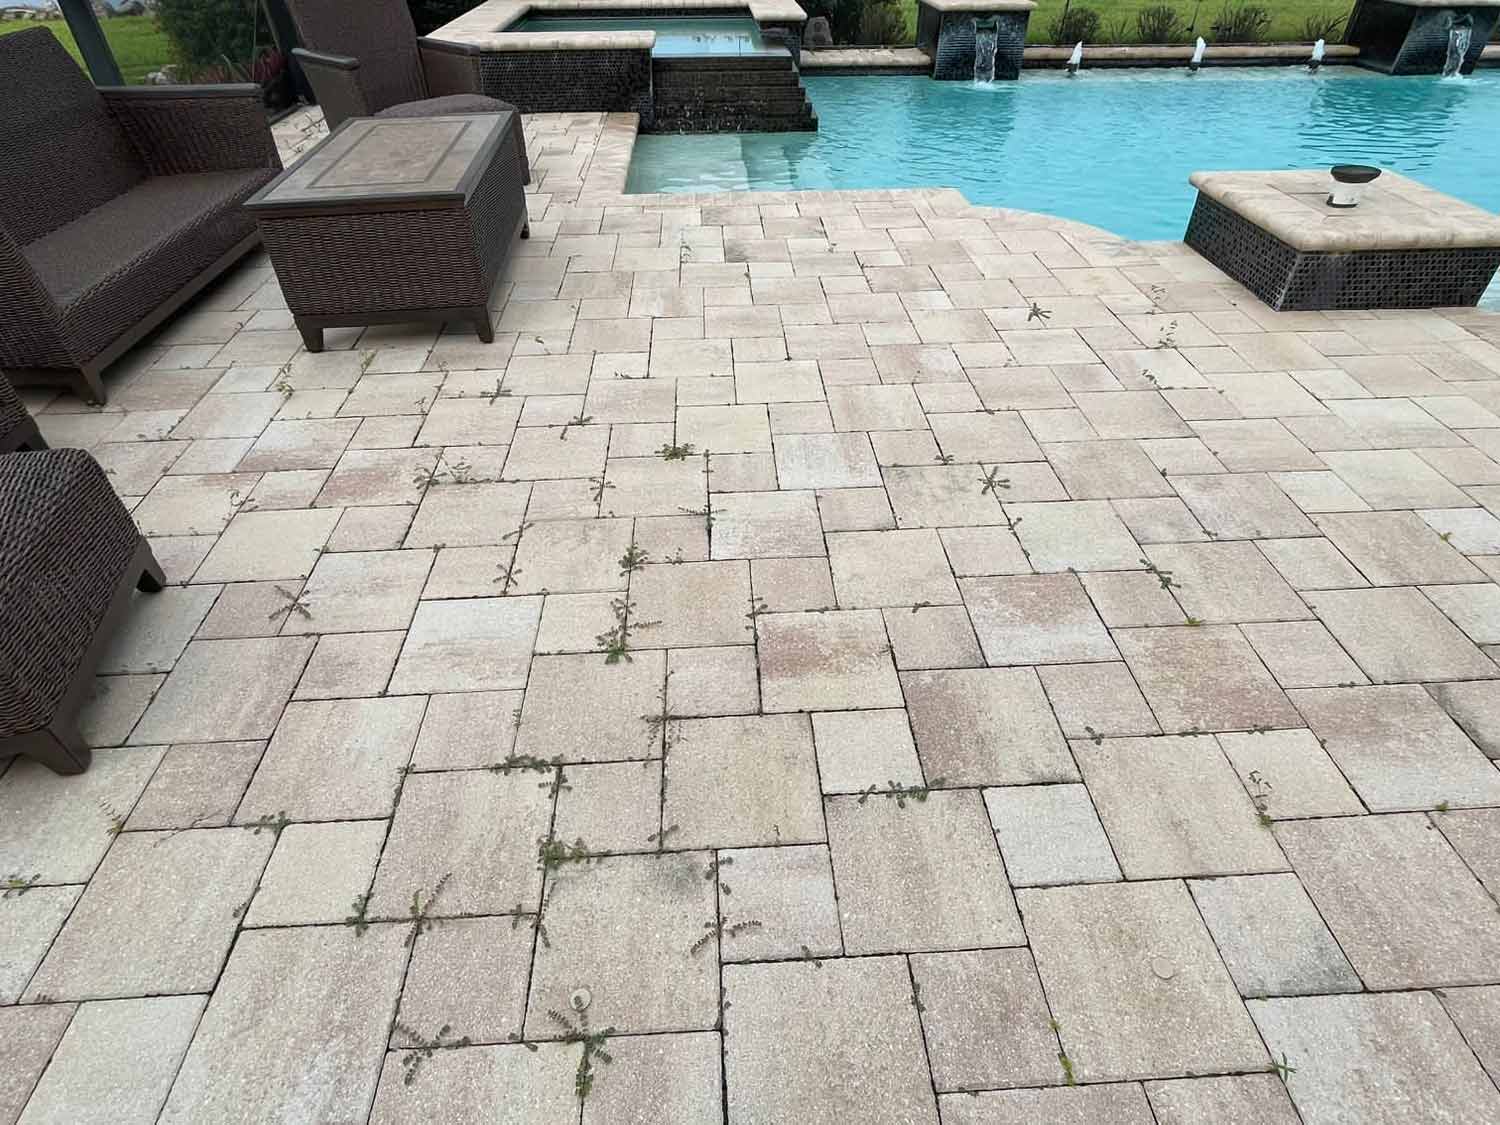 Dirty paved pool deck before pressure washing